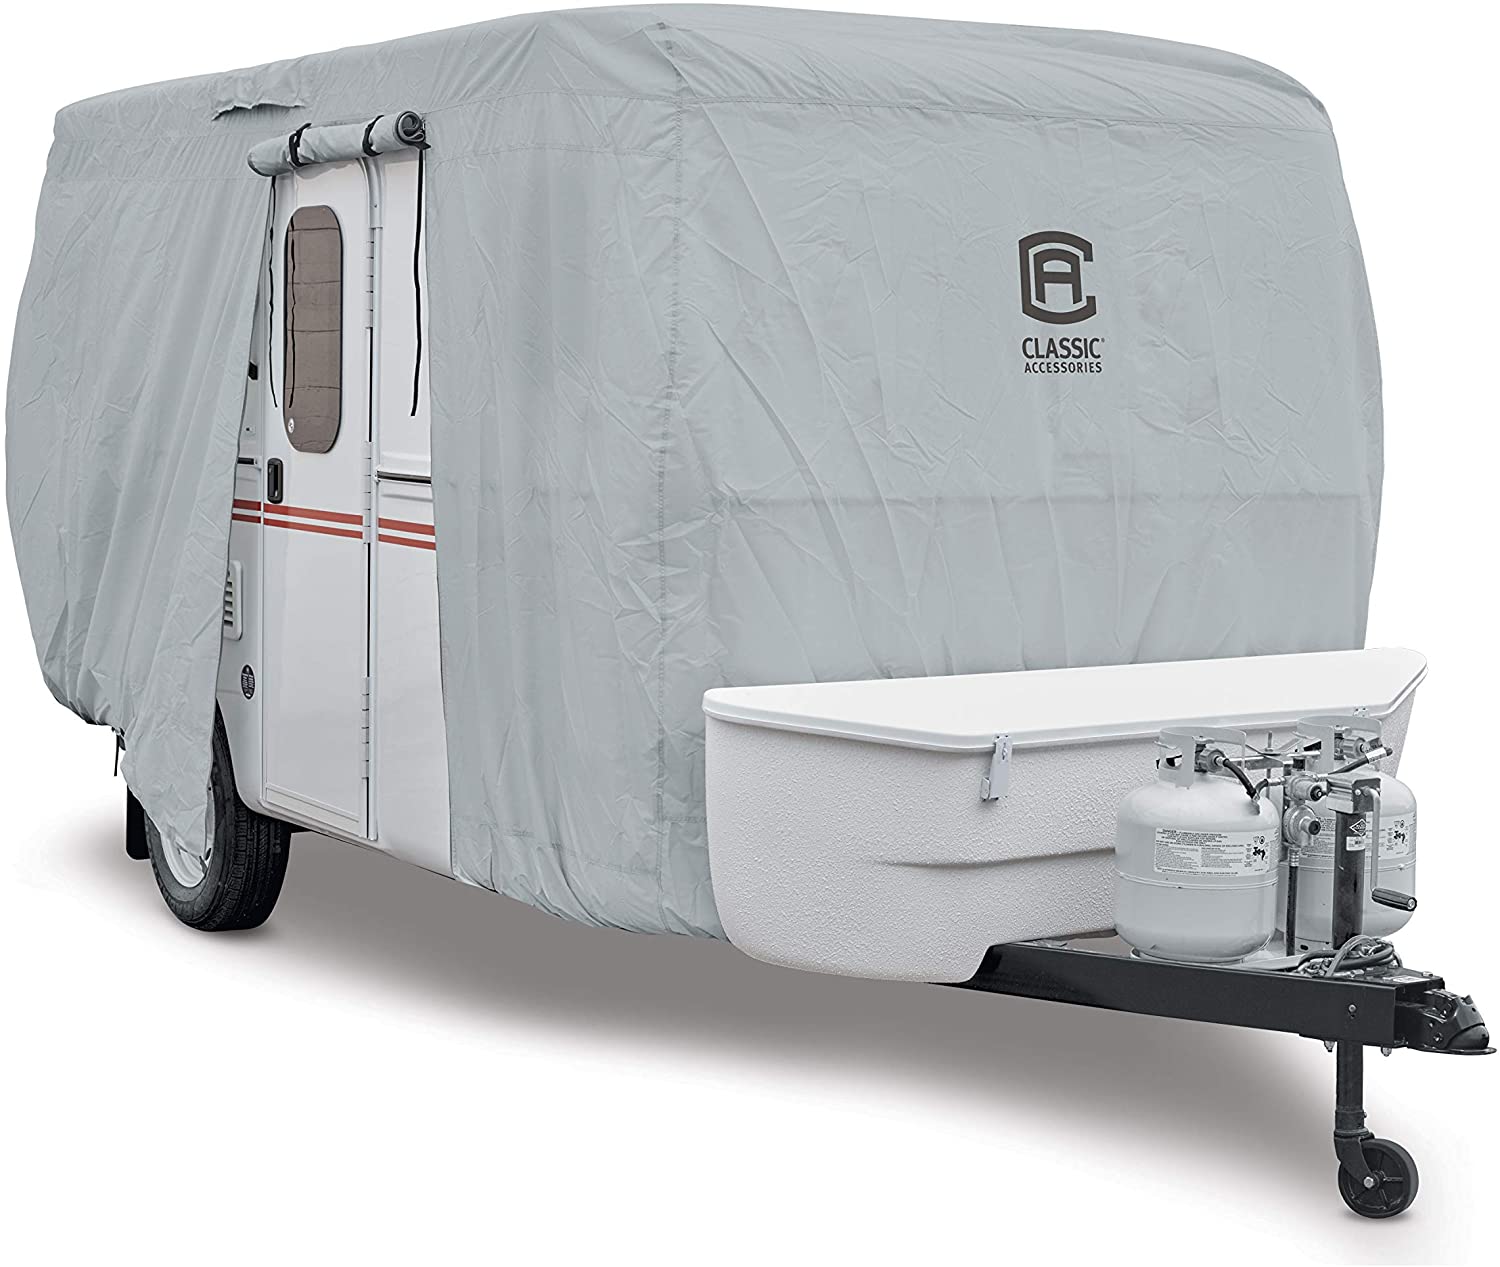 Classic Accessories - 80-407-141001-RT Over Drive PermaPRO Deluxe Extra Tall 5th Wheel Cover, Fits 8' - 10' RVs - Lightweight Ripstop and Water Repellent RV Cover (80-187-191001-00) (Fits 8' - 10')